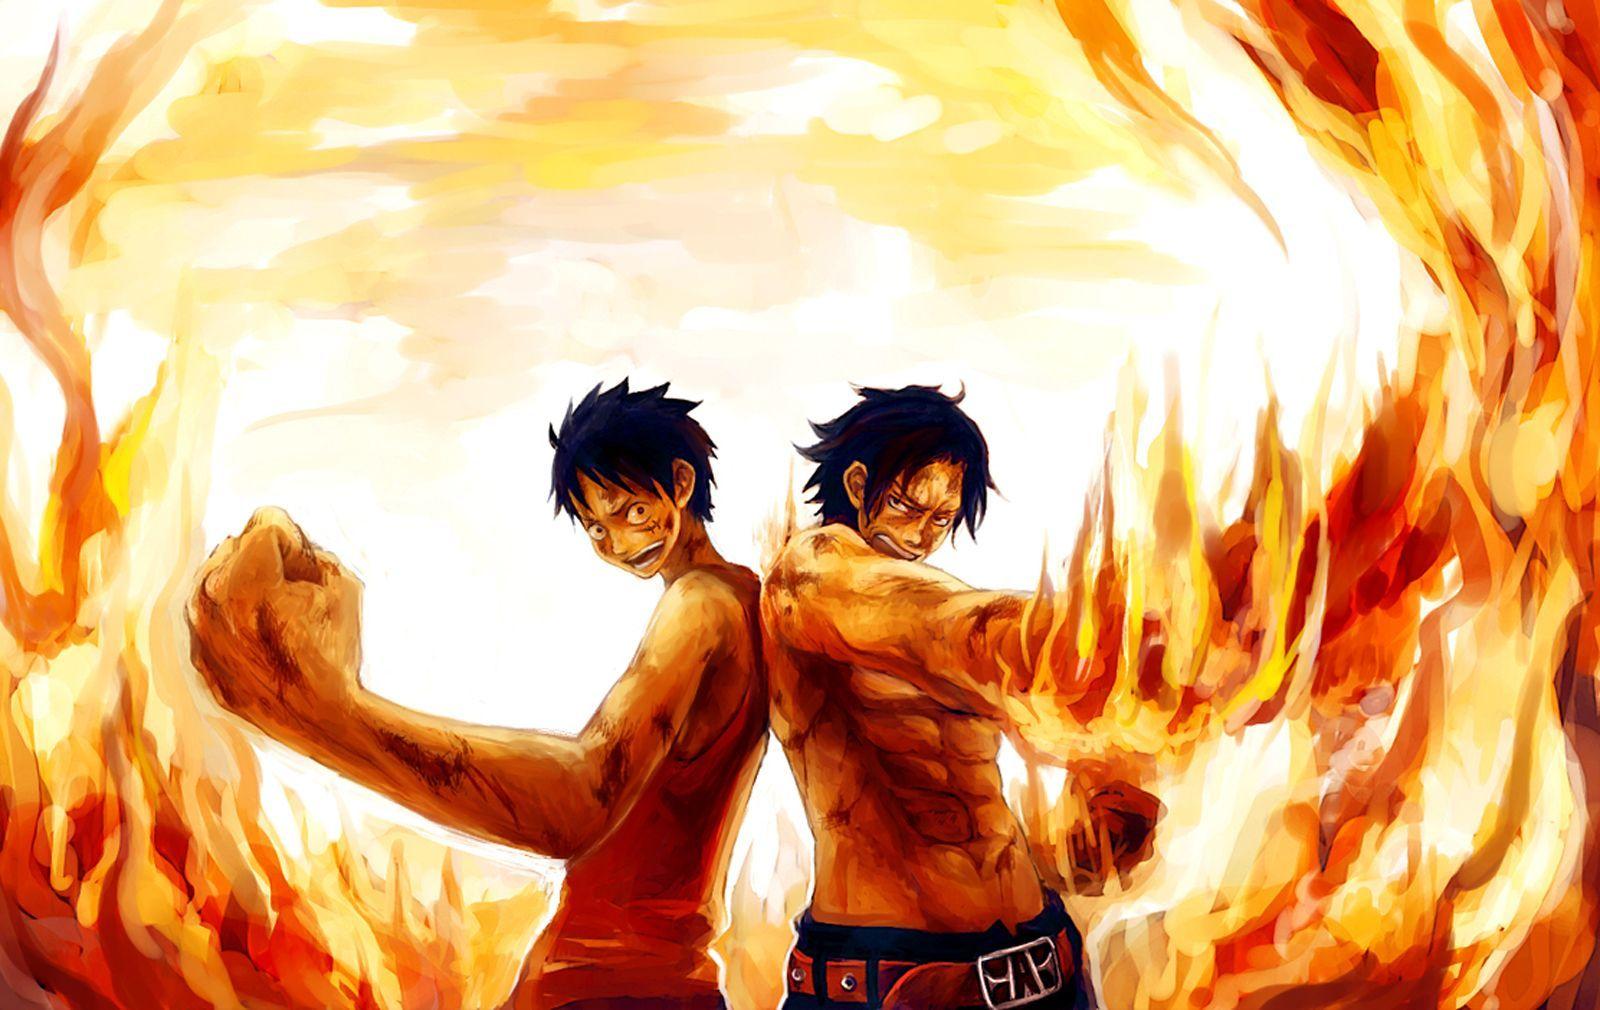 Download One Piece Luffy And Ace Wallpapers For Iphone Is Cool.